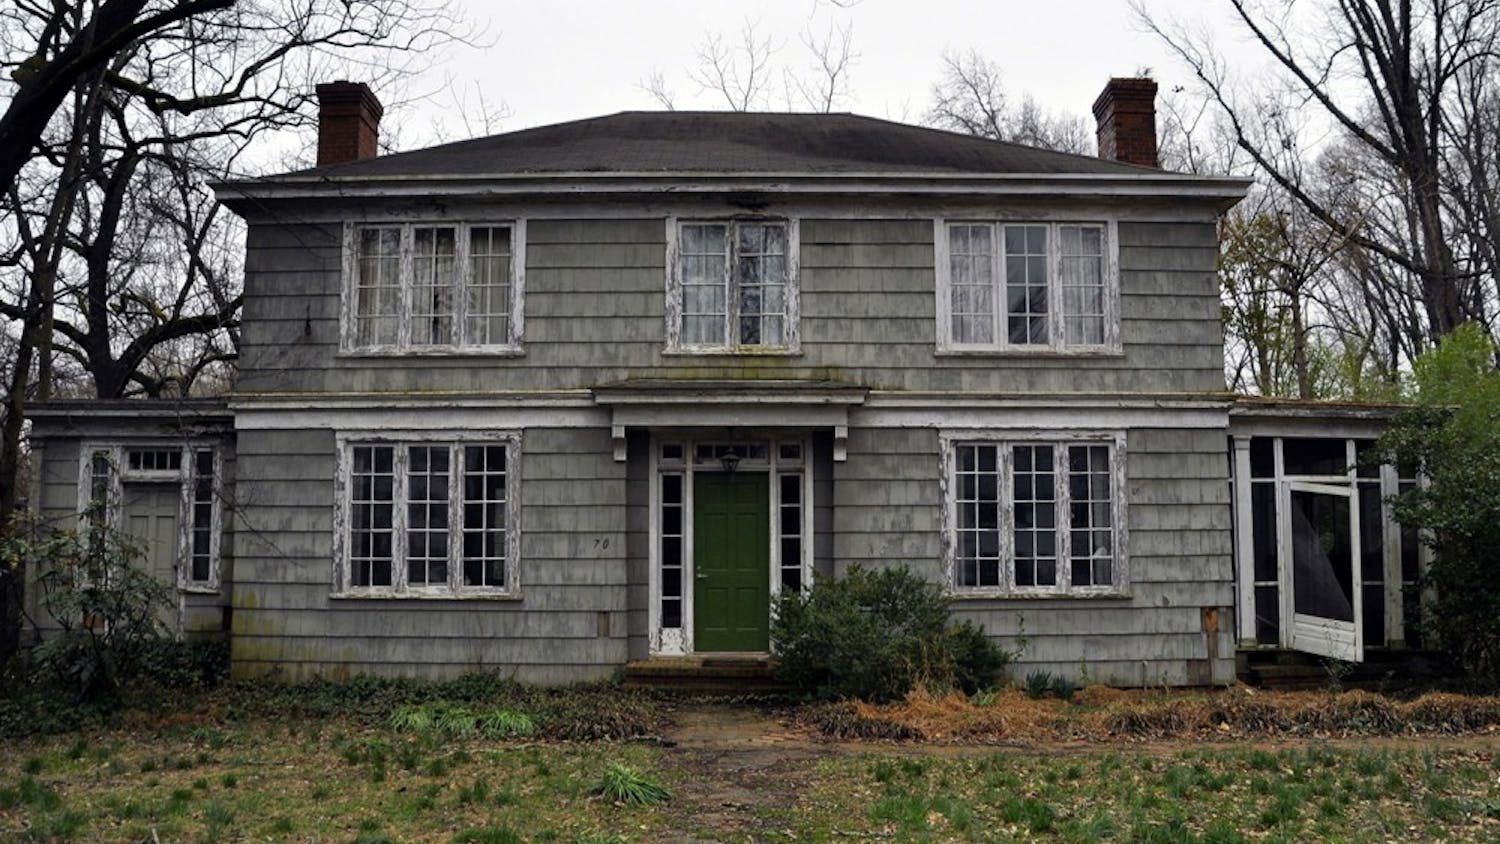 A local couple has requested permission to tear down this historic house, located at 704 Gimghoul Road, to build a new one in its place.